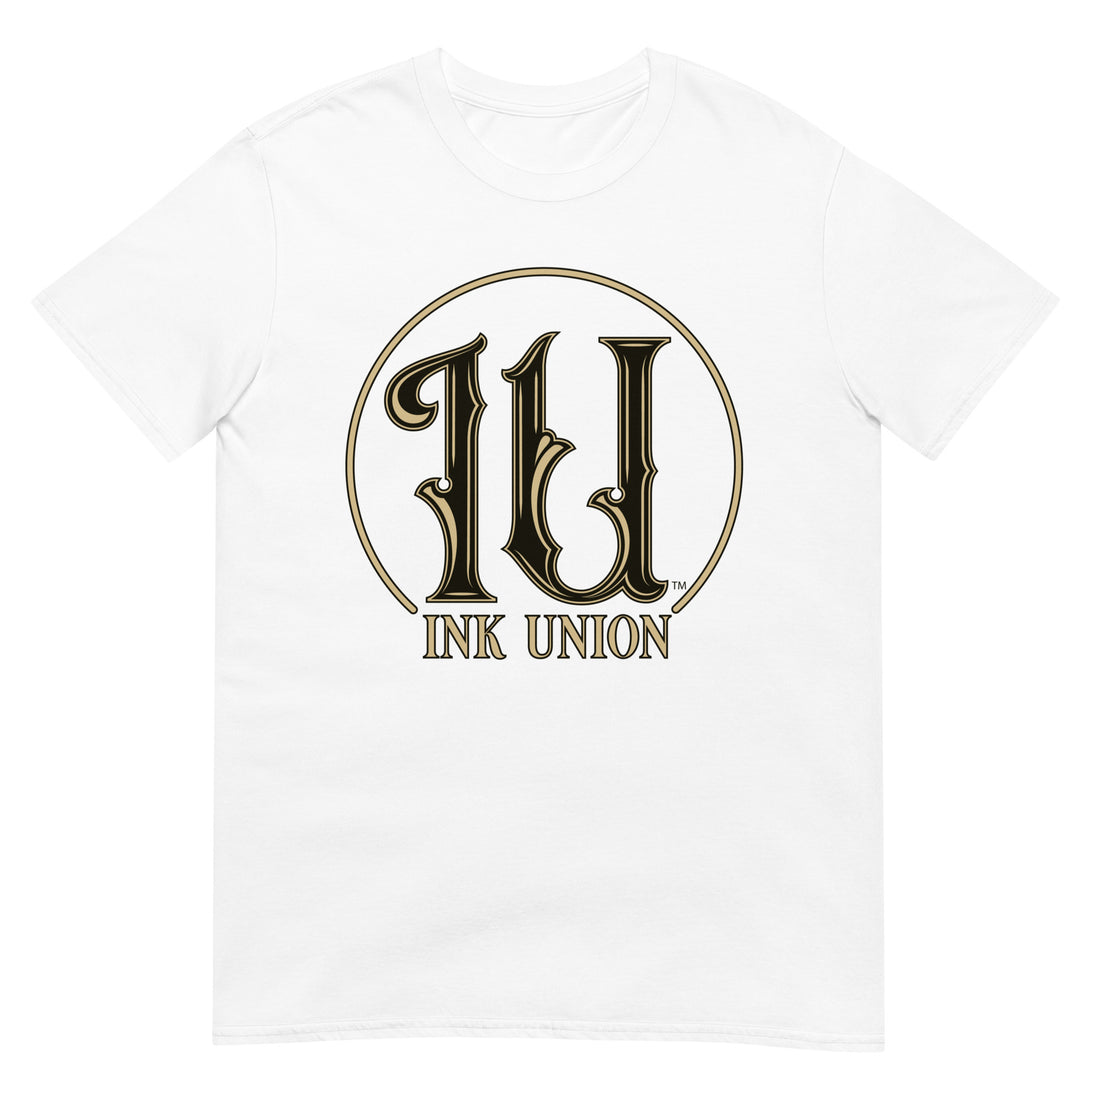 Ink Union Clothing Co. white t-shirt featuring the Ink Union ring logo in black and gold.